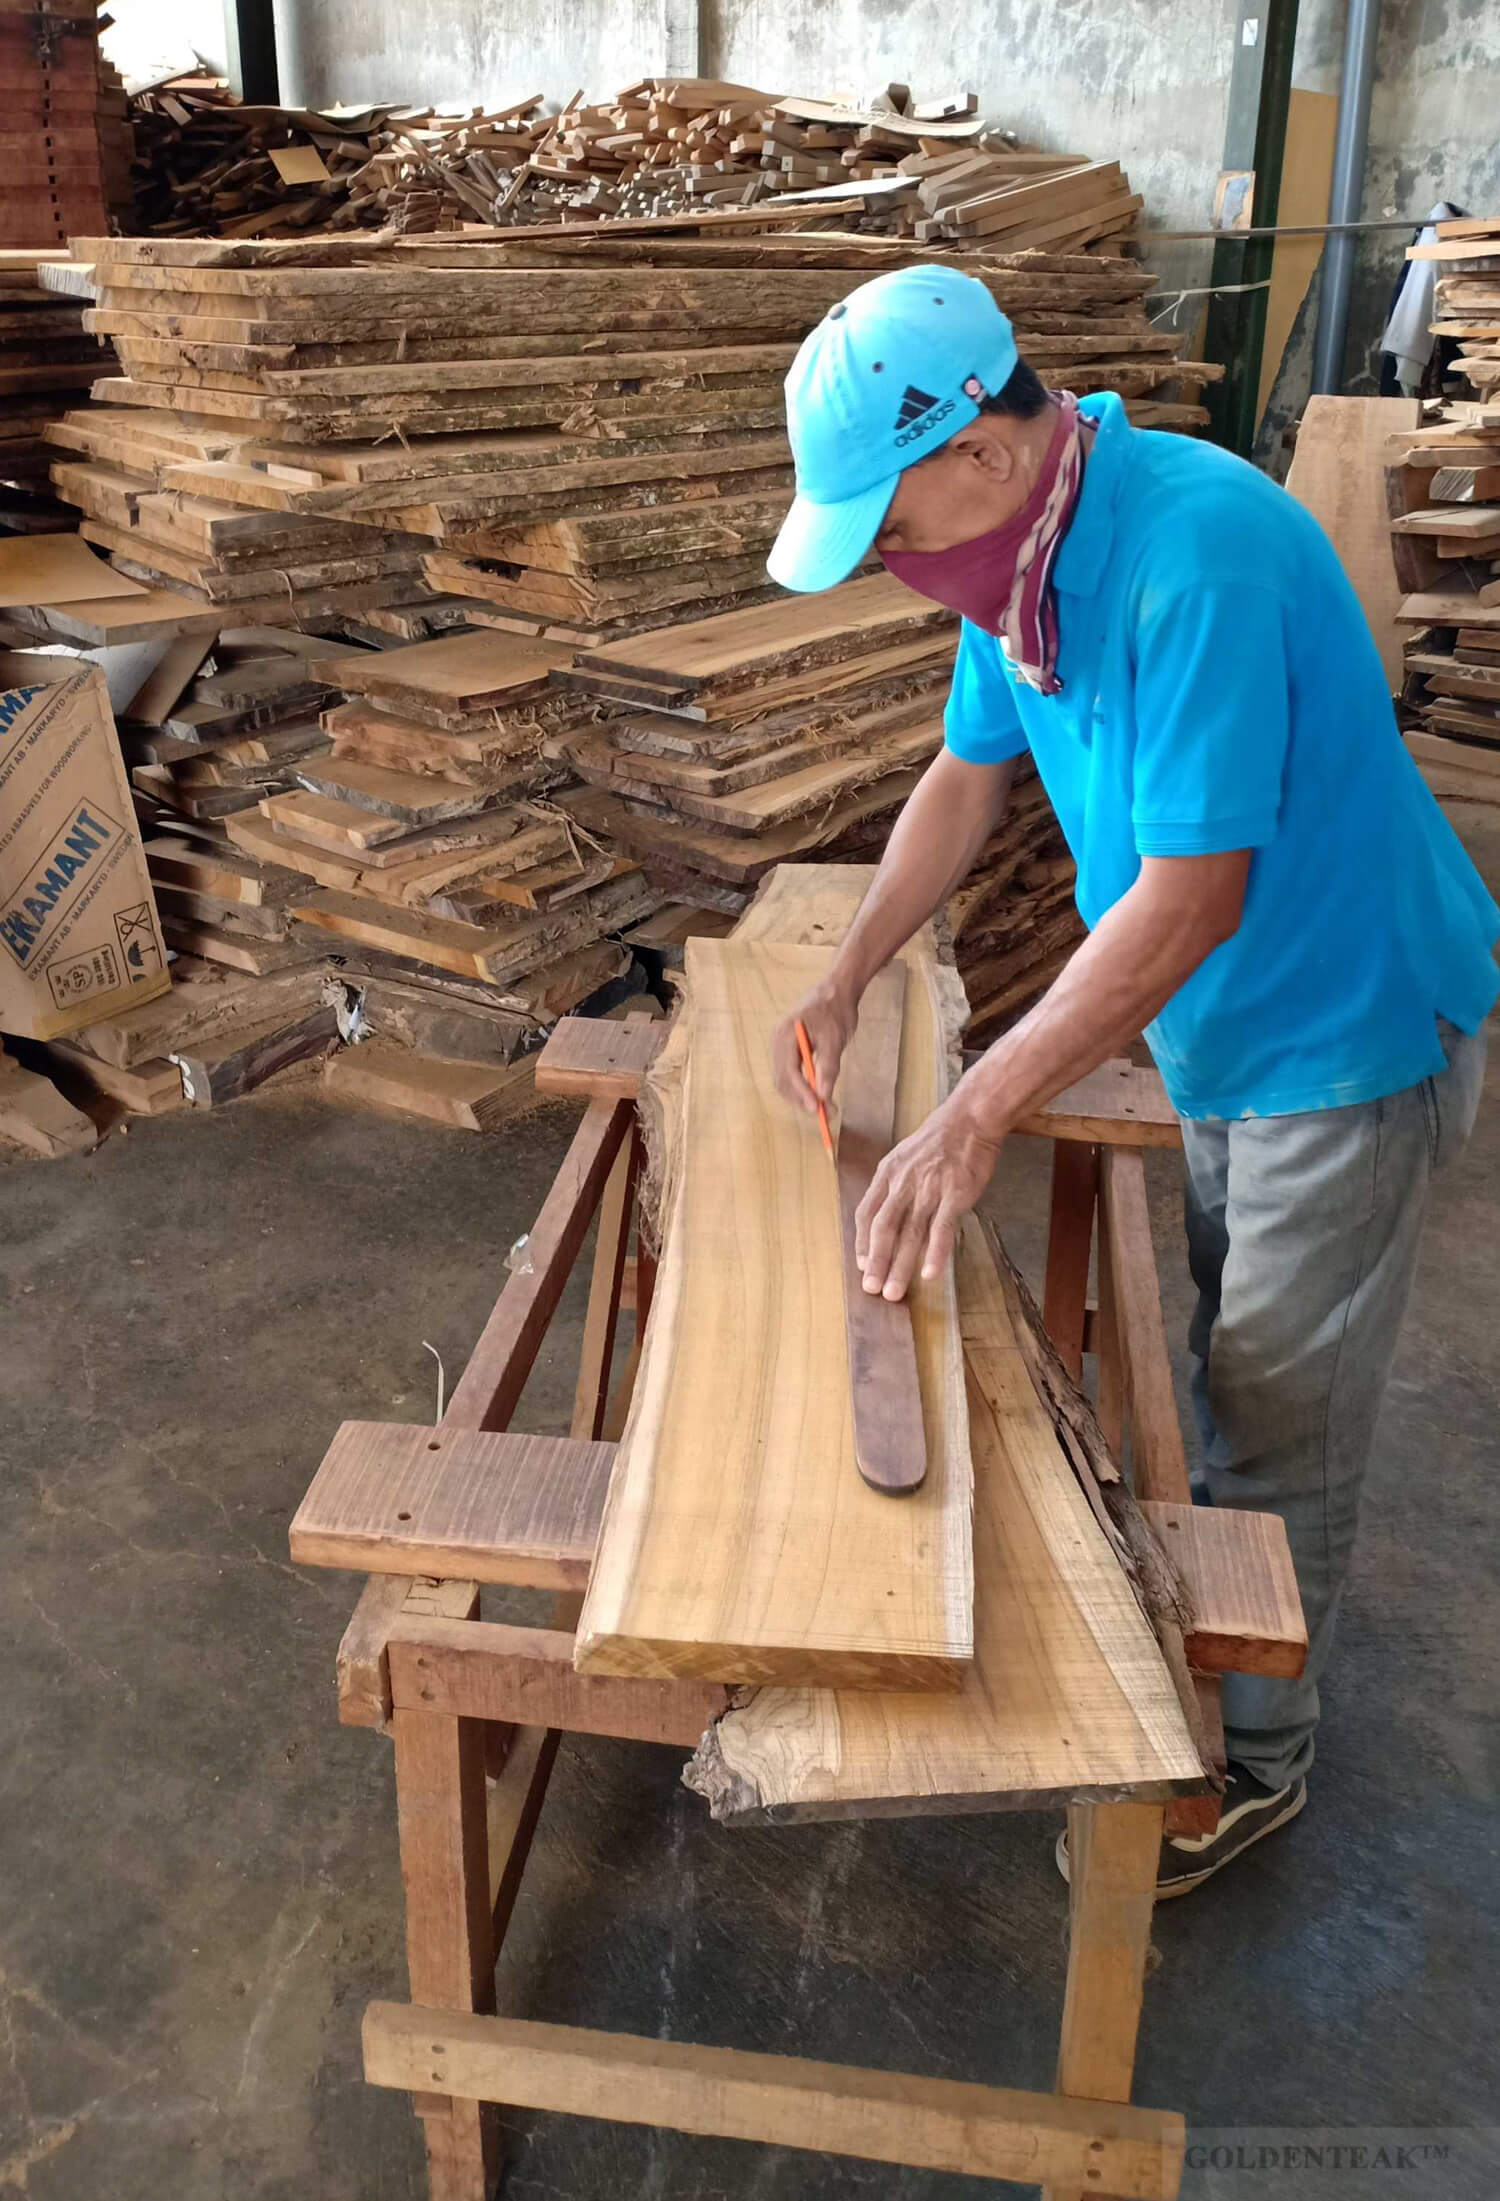 Choosing Heartwood Sections for Grade A Premium Quality Outdoor Furniture - Goldenteak